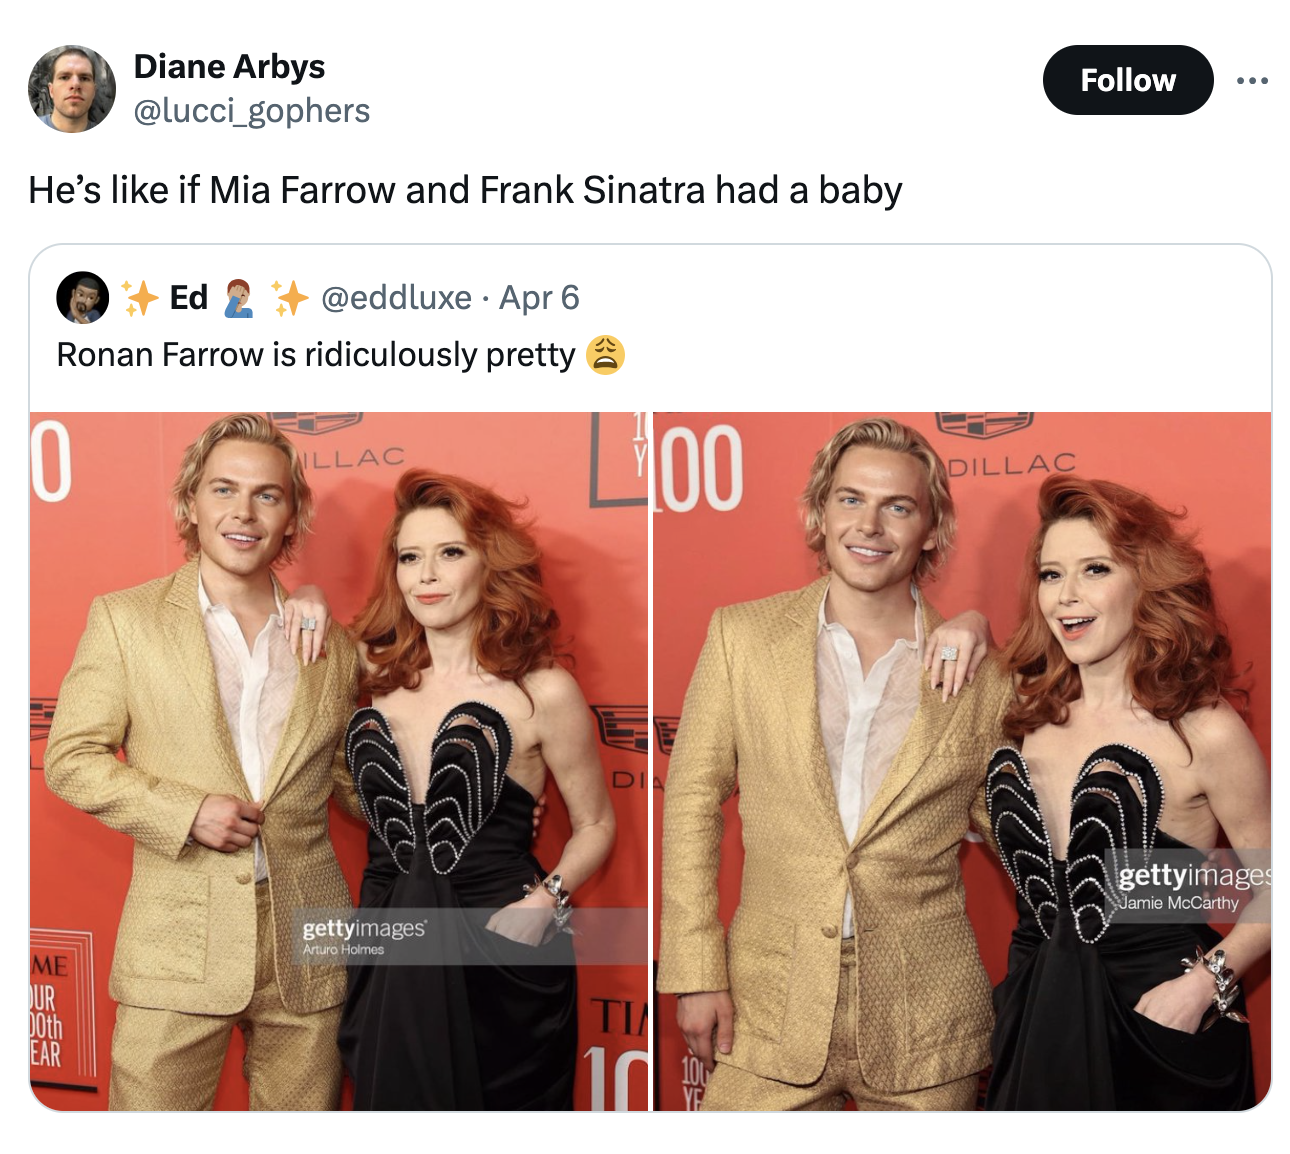 screenshot - Diane Arbys He's if Mia Farrow and Frank Sinatra had a baby Ed 2 Apr 6 Ronan Farrow is ridiculously pretty 0 Llac L00 Dillac D Me 10th Ear gettyimages Ti gettyimages Jamie McCarthy